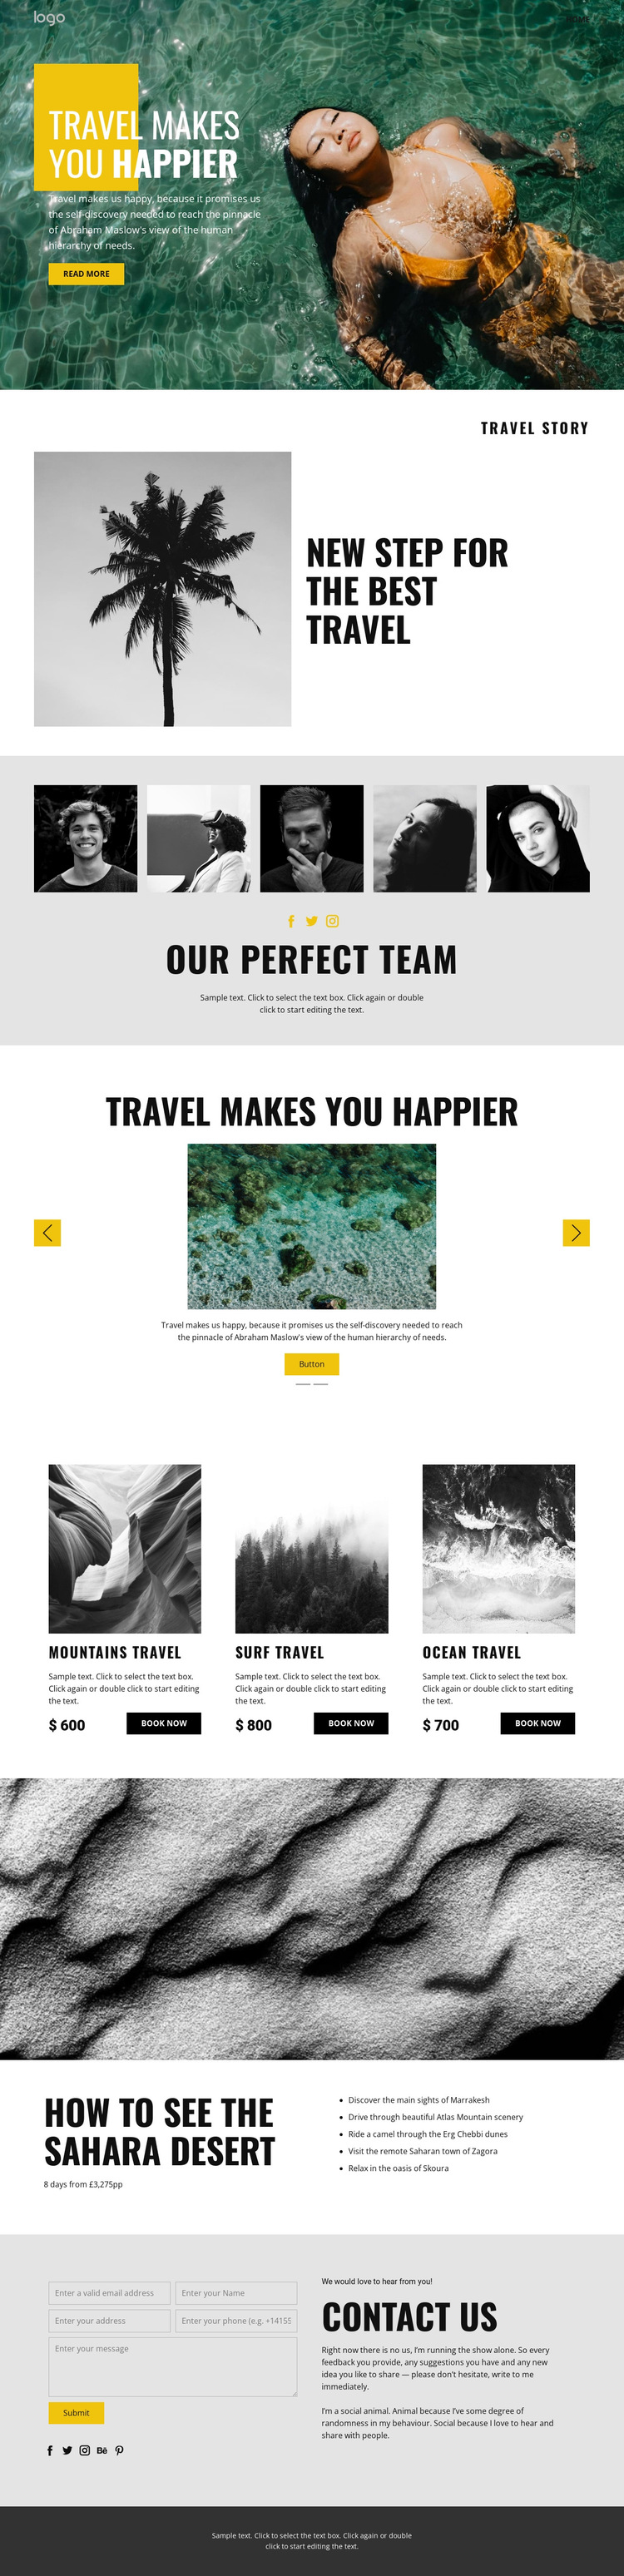 Happy people deserve travel HTML5 Template